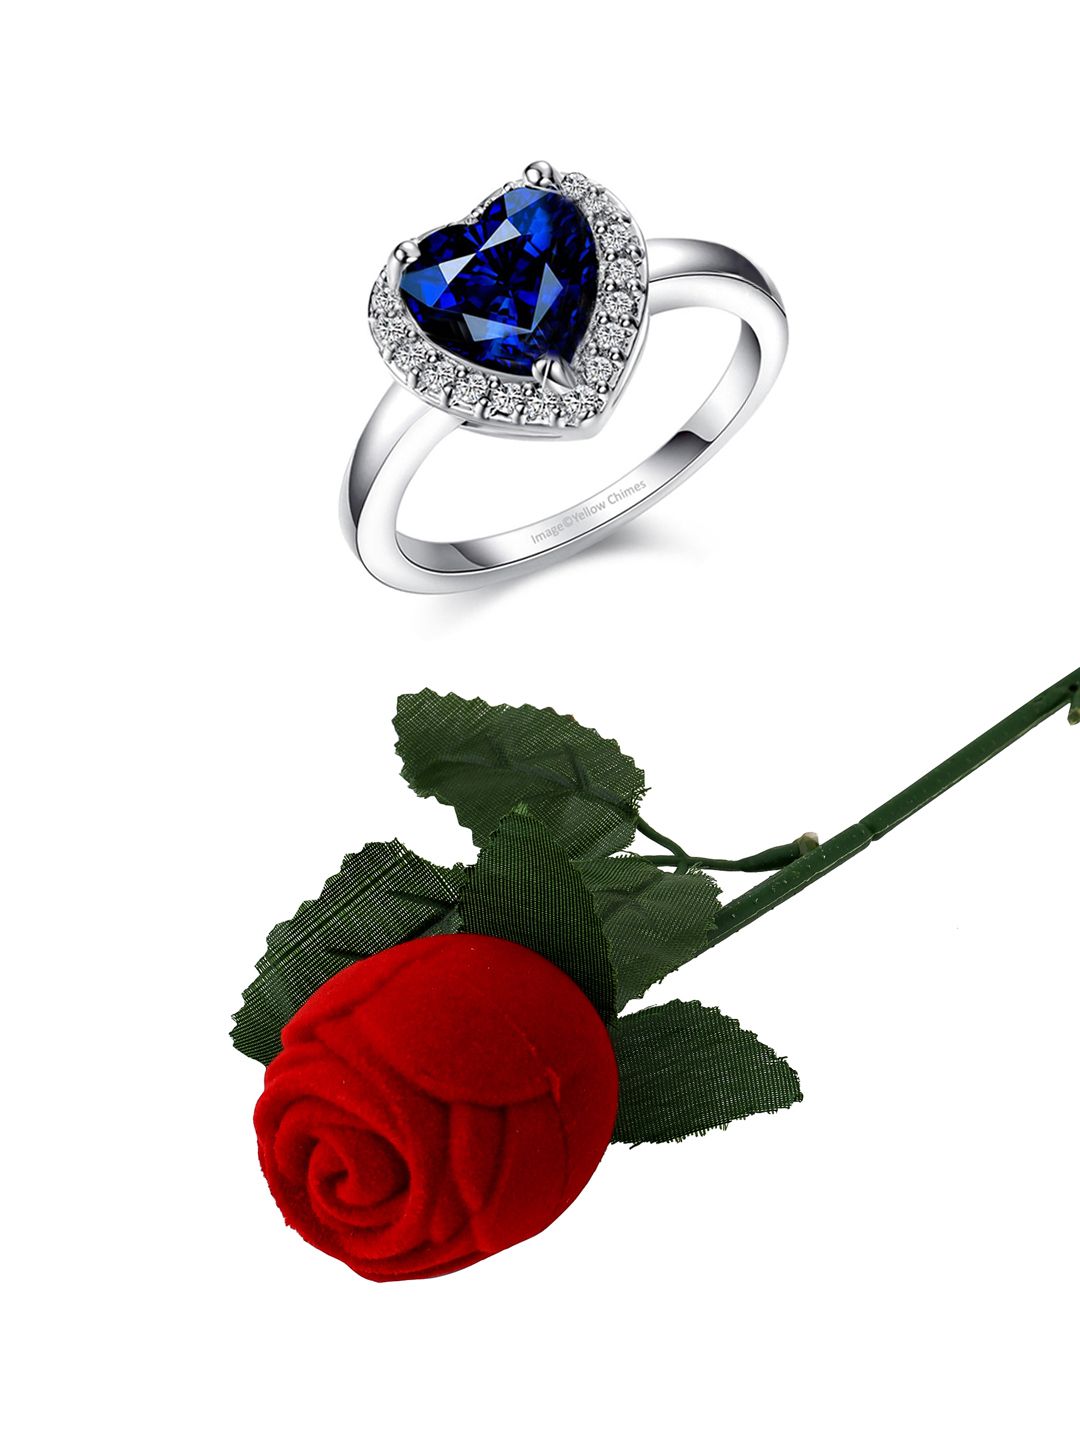 Yellow Chimes Set Of 2 Silver-Toned Blue & White Crystal Studded Finger Ring With Rose Ring Box Price in India